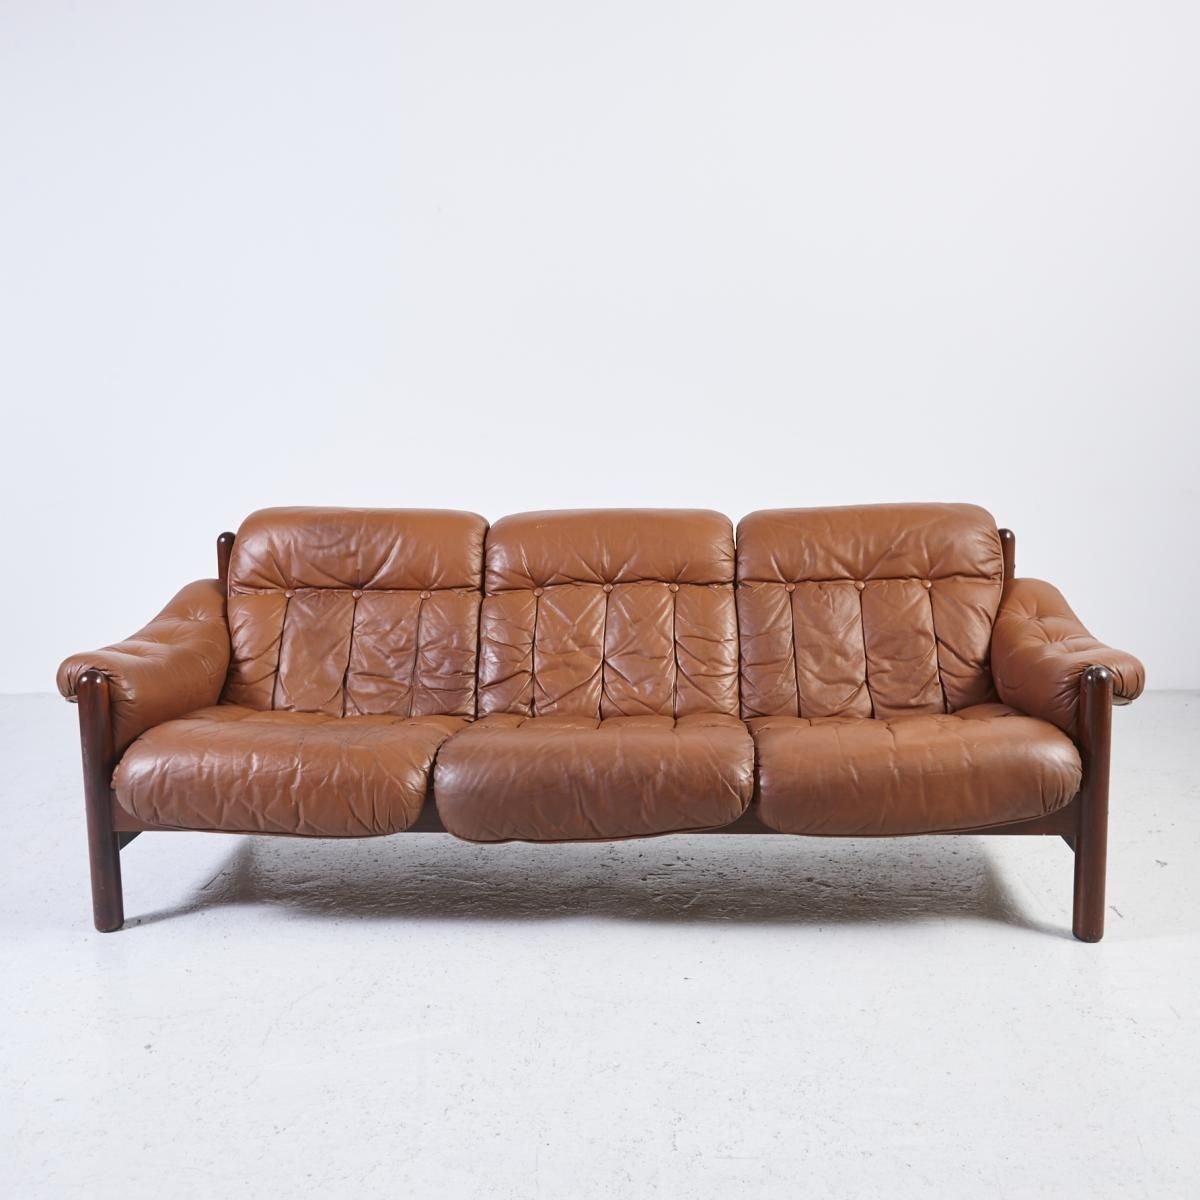 Popular 3 Seater Leather Sofas With Vintage 3 Seater Leather Sofa With Teak Frame For Sale At Pamono (Photo 1 of 20)